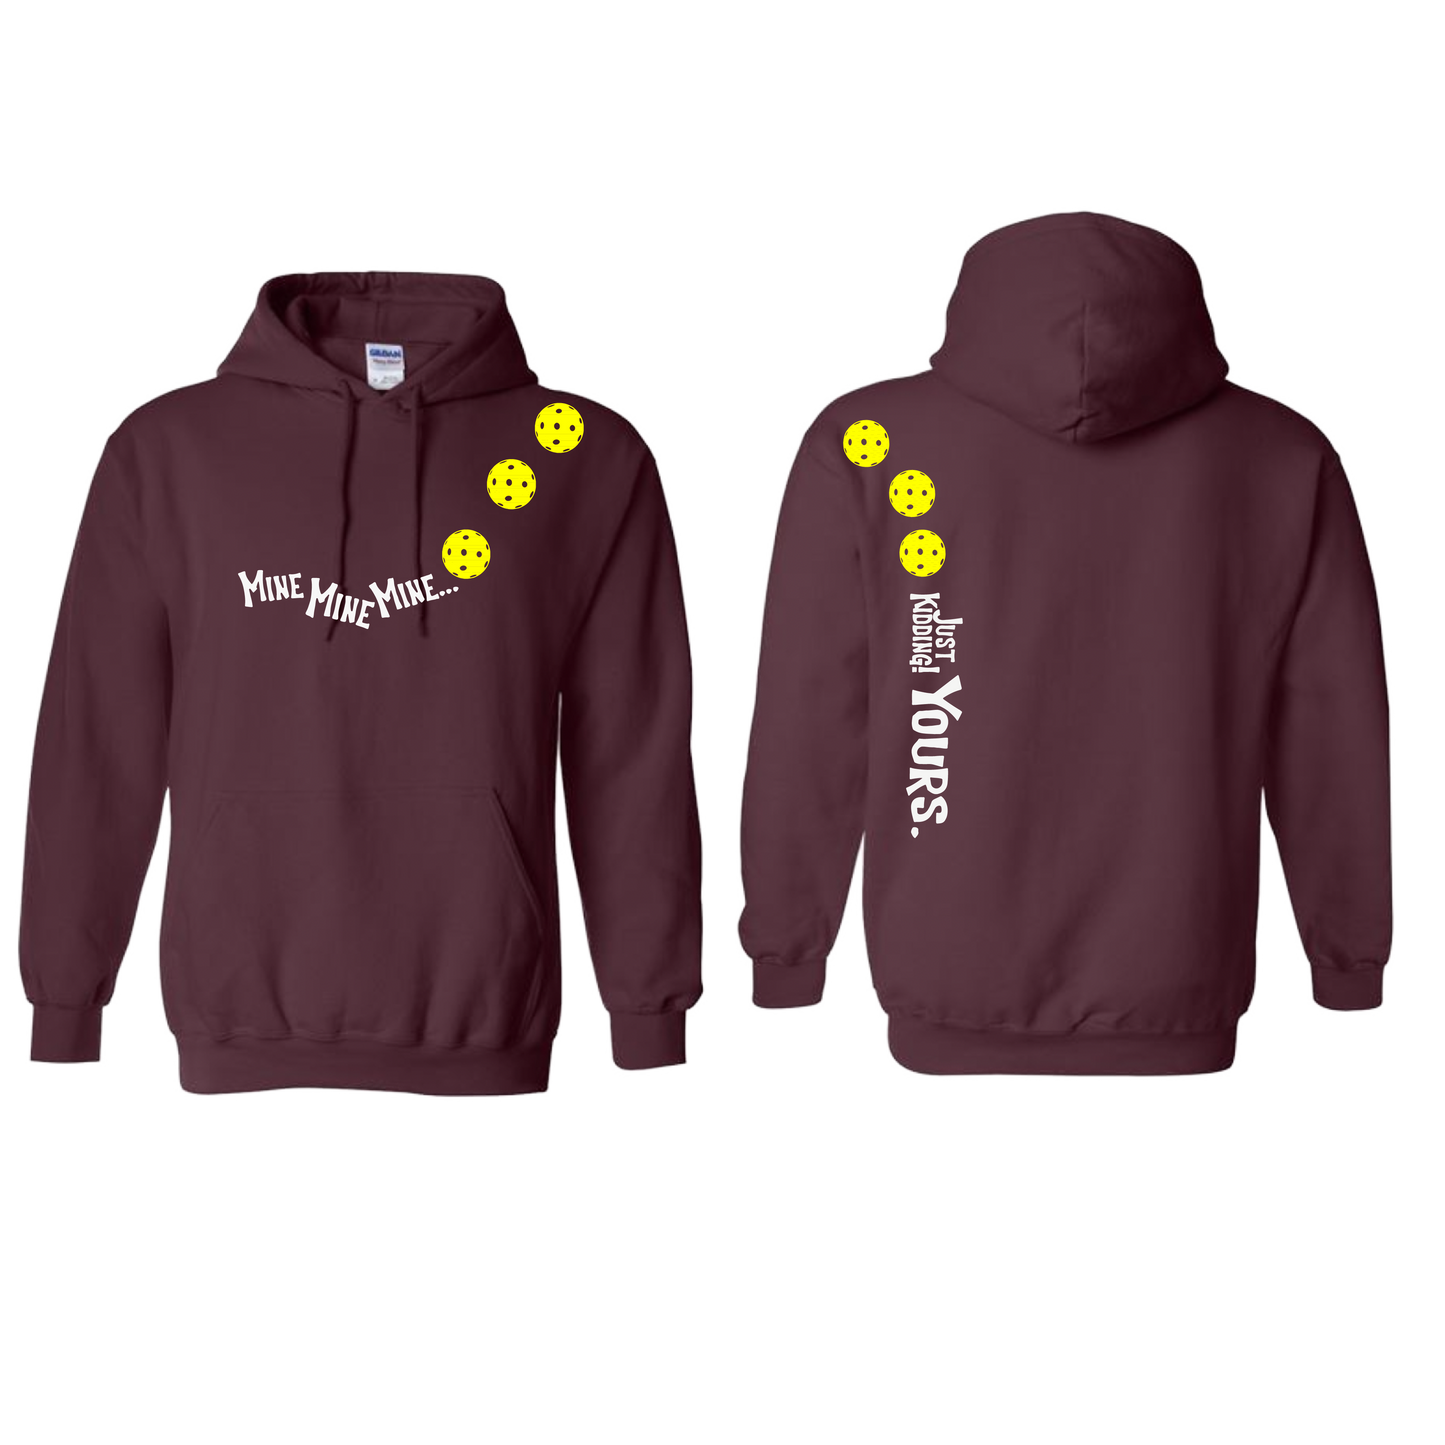 Mine JK Yours (Pickleball Colors Orange Yellow or Red) | Unisex Hoodie Athletic Sweatshirt | 50% Cotton/50% Polyester